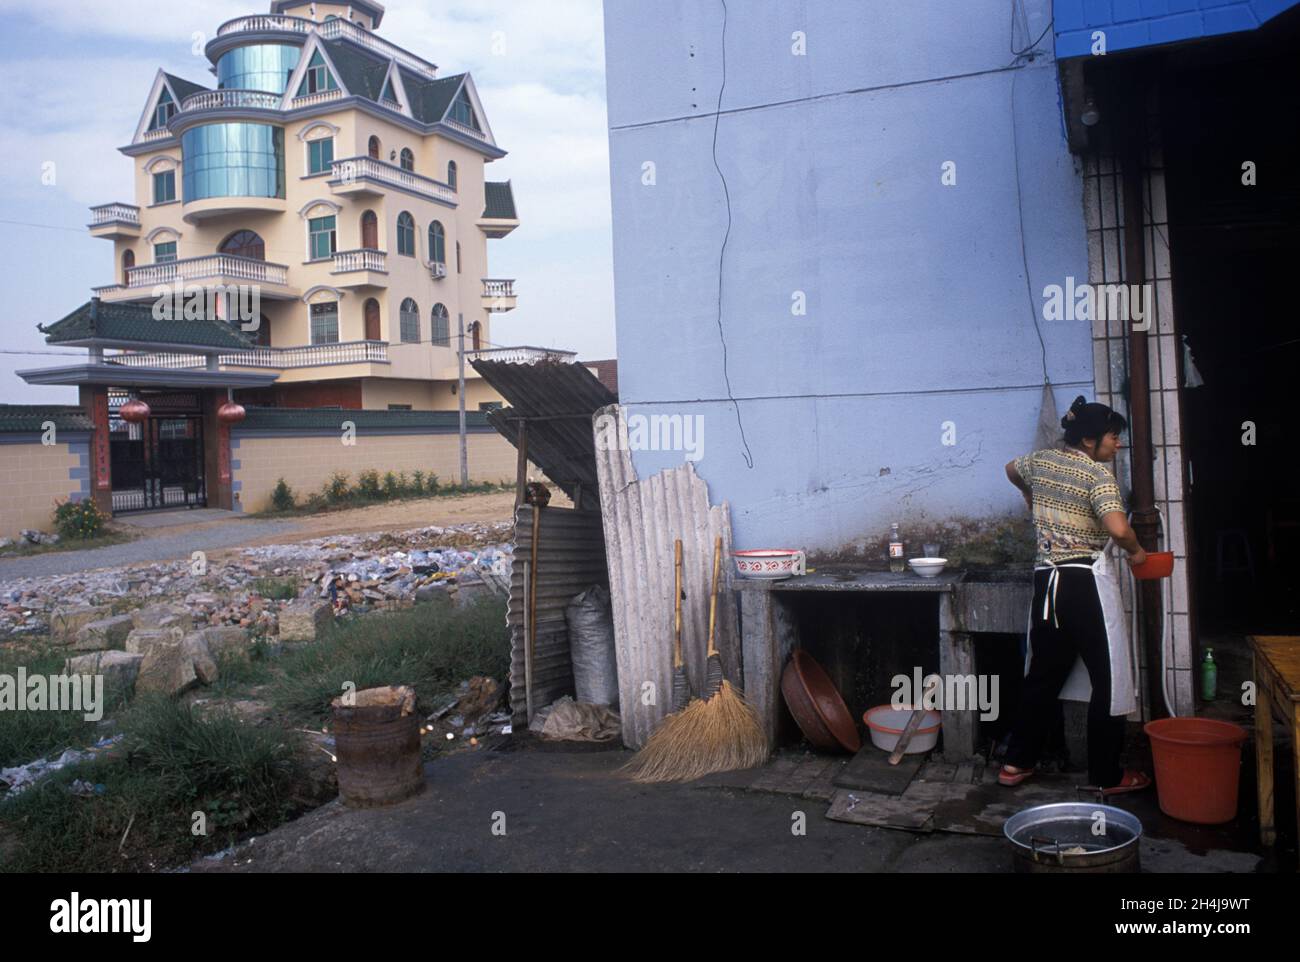 China 2000s, wealth poverty income disparity, Huge modern new trophy house and small local cafe across the road. Chinese new money  Yiwu, Zhejiang Province. 2001, 2000s.  HOMER SYKES Stock Photo